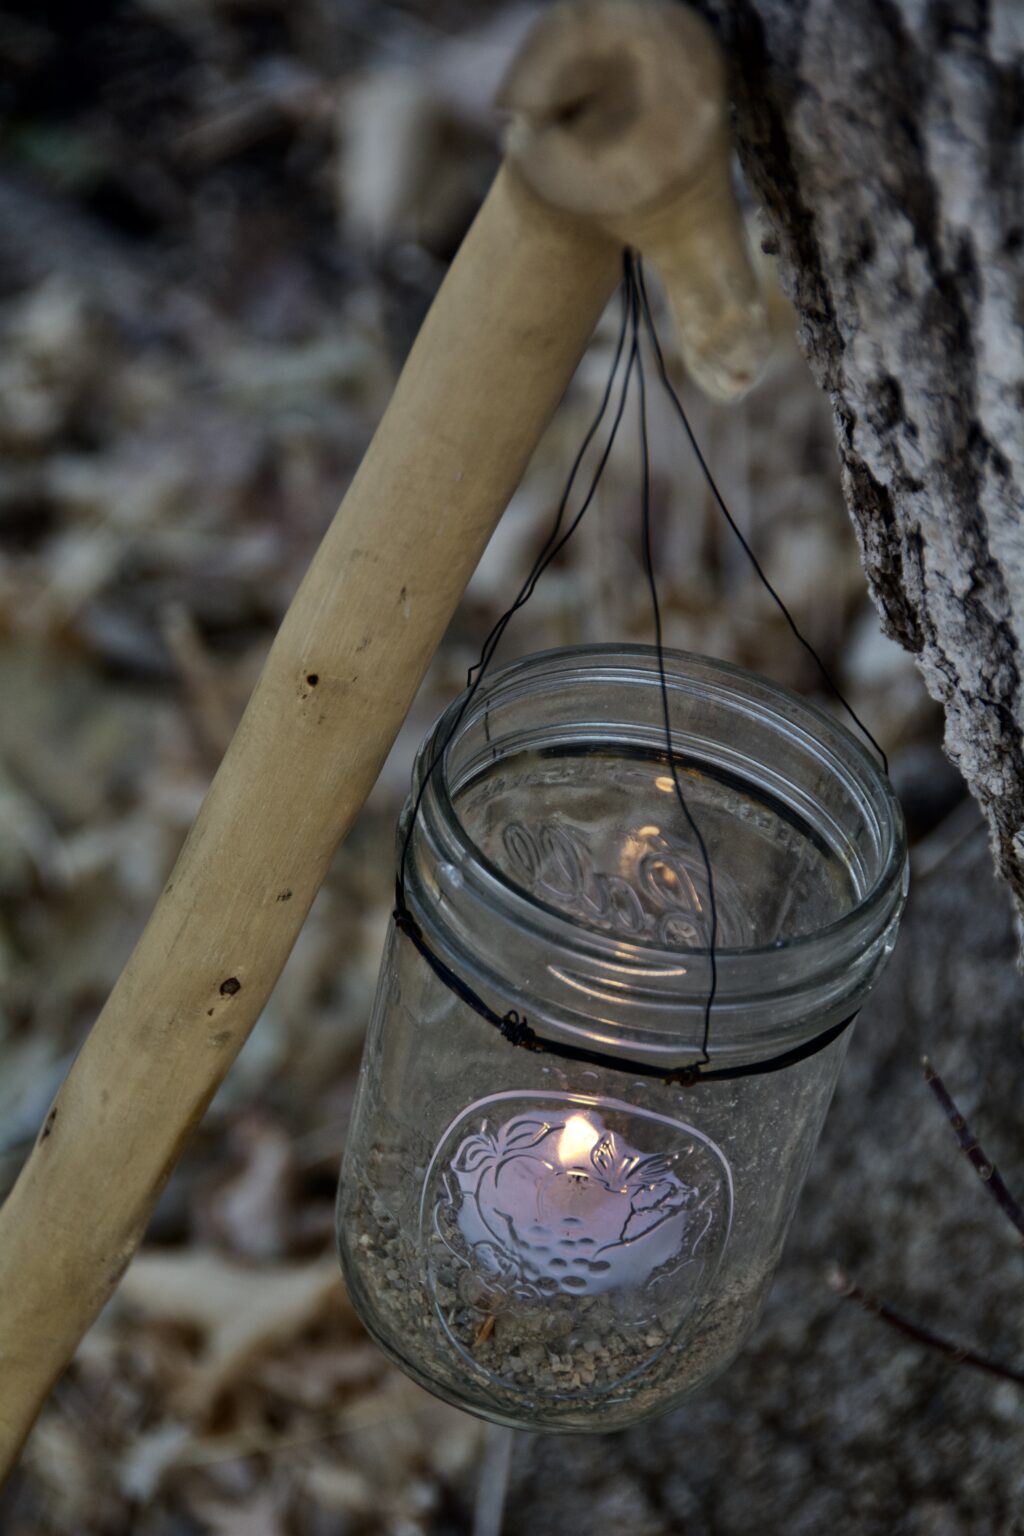 mason jar candle hanging from a wooden cane leaning against a tree trunk. Autumn leaves are on the ground.